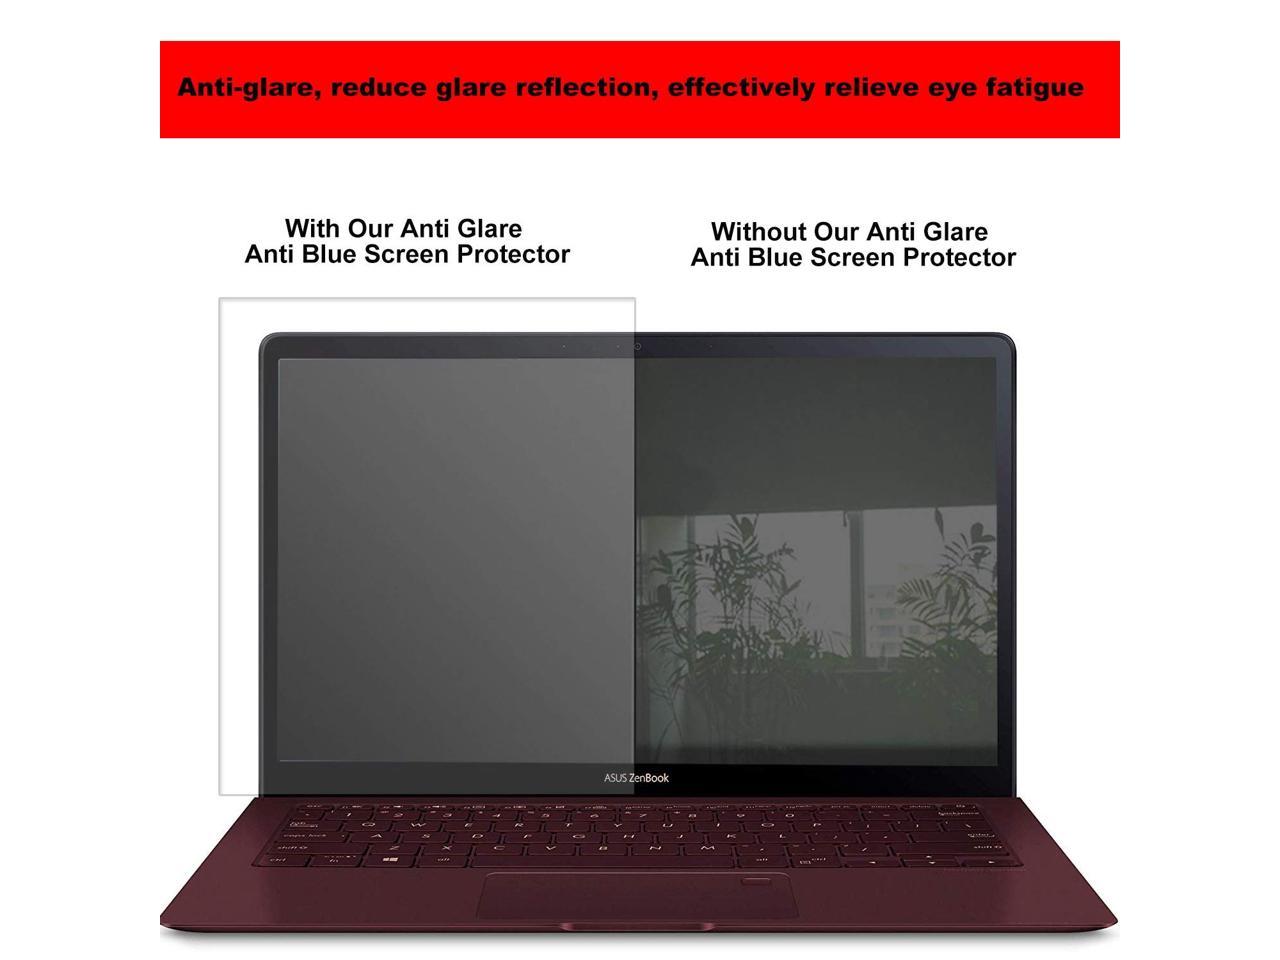 13.3W Inch Anti Blue Light Screen Protector for Widescreen Laptop Reduce Eye Fatigue Strain 2 Pack Upgrade Laptop Screen Protector Filter Out Blue Light Relief with Aspect Ratio 16:9 